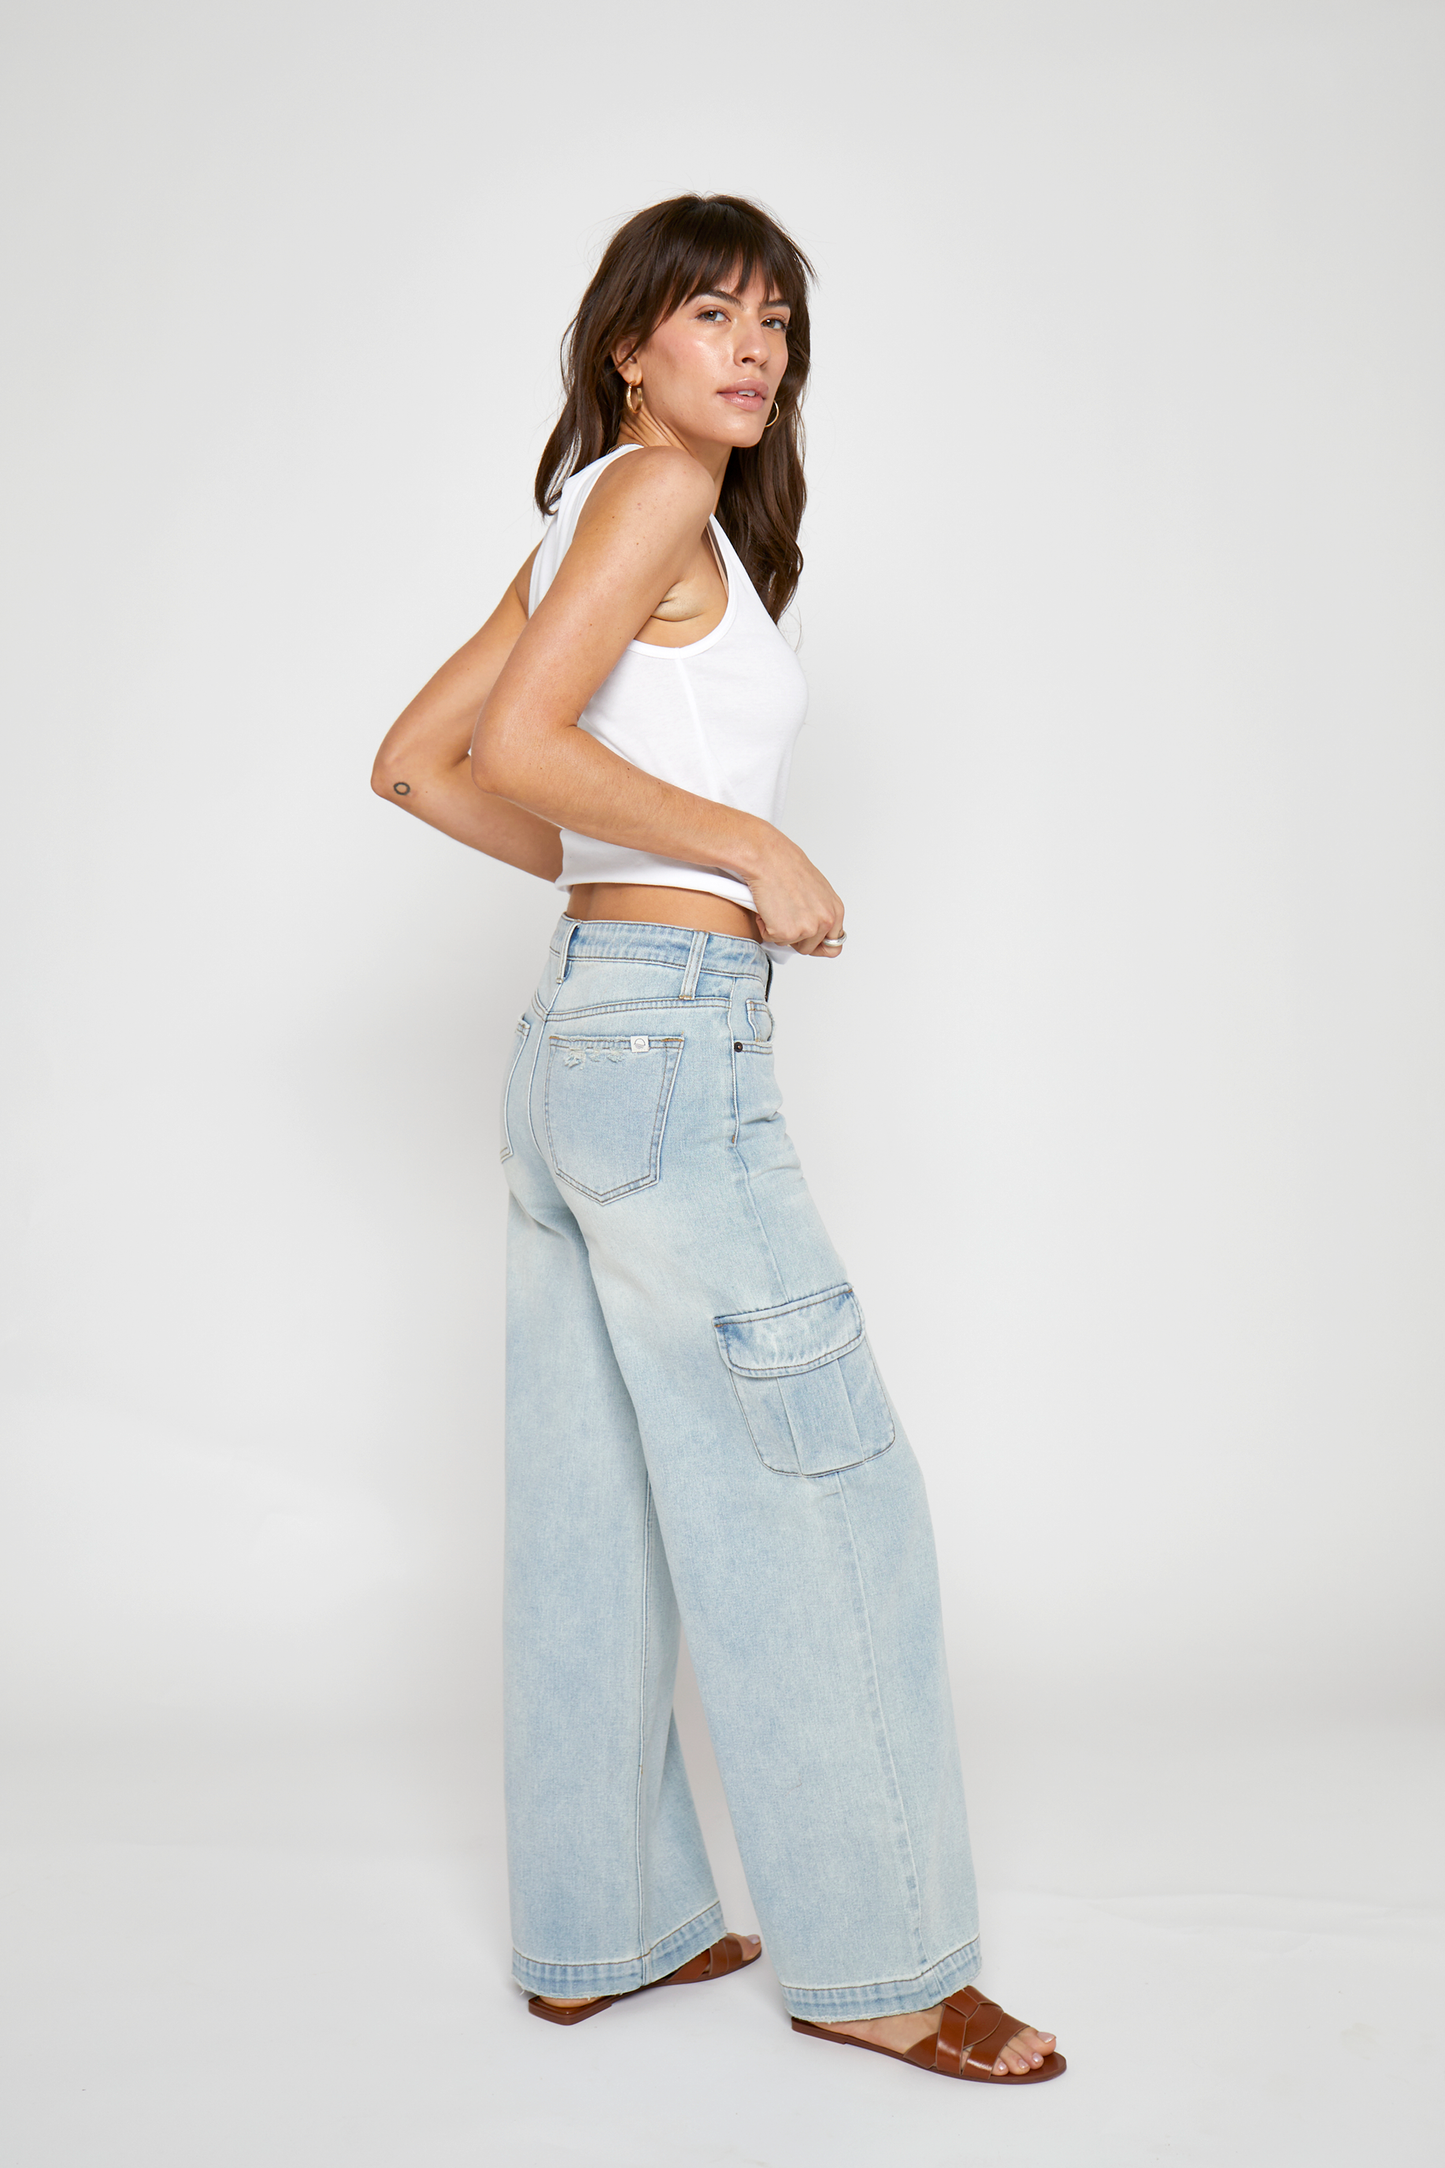 Wide leg Jeans Mid Rise Baggy The Madison Cargo Hotel Cali.: Hotel California